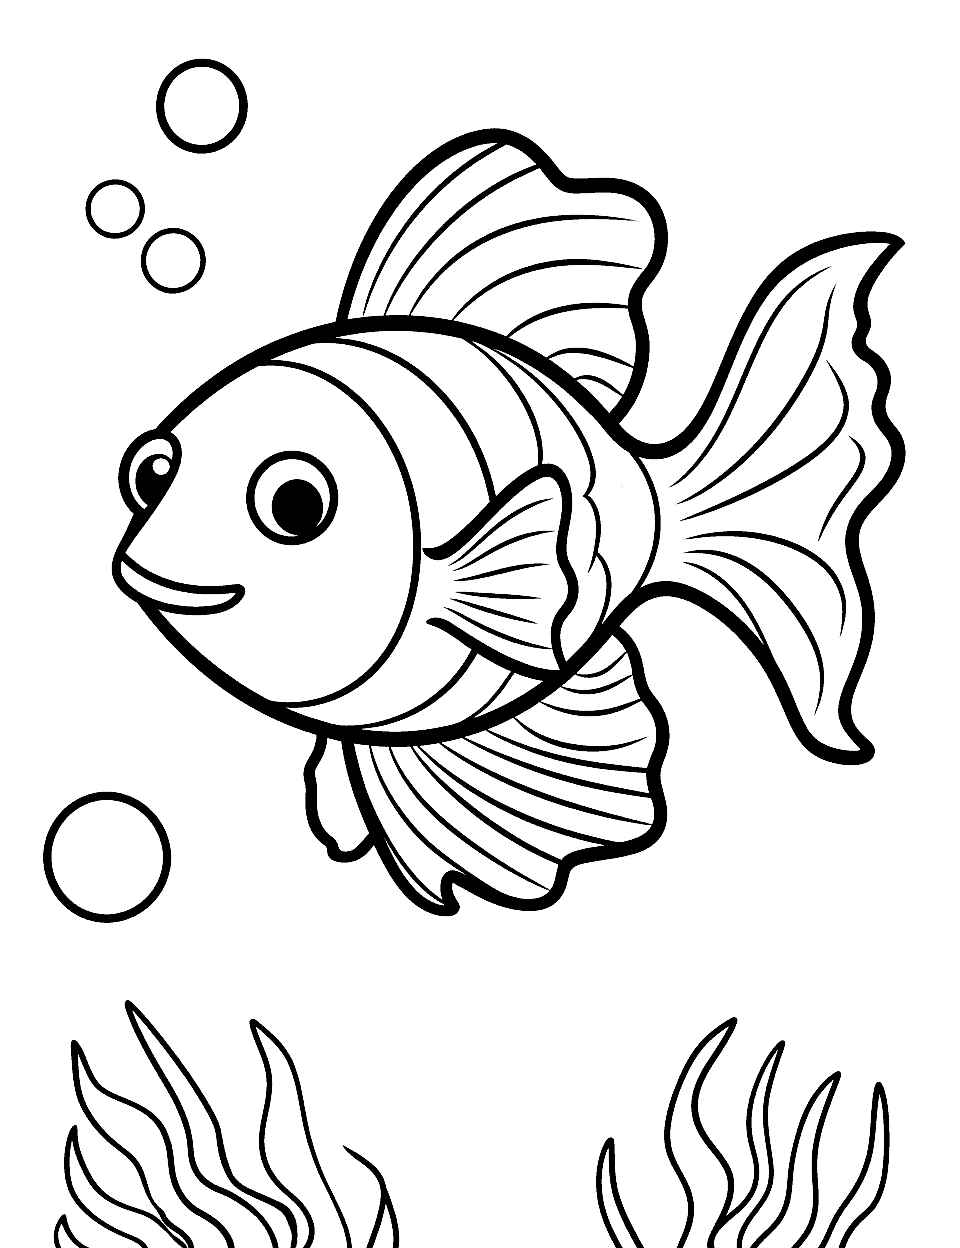 Fish coloring pages free printable sheets